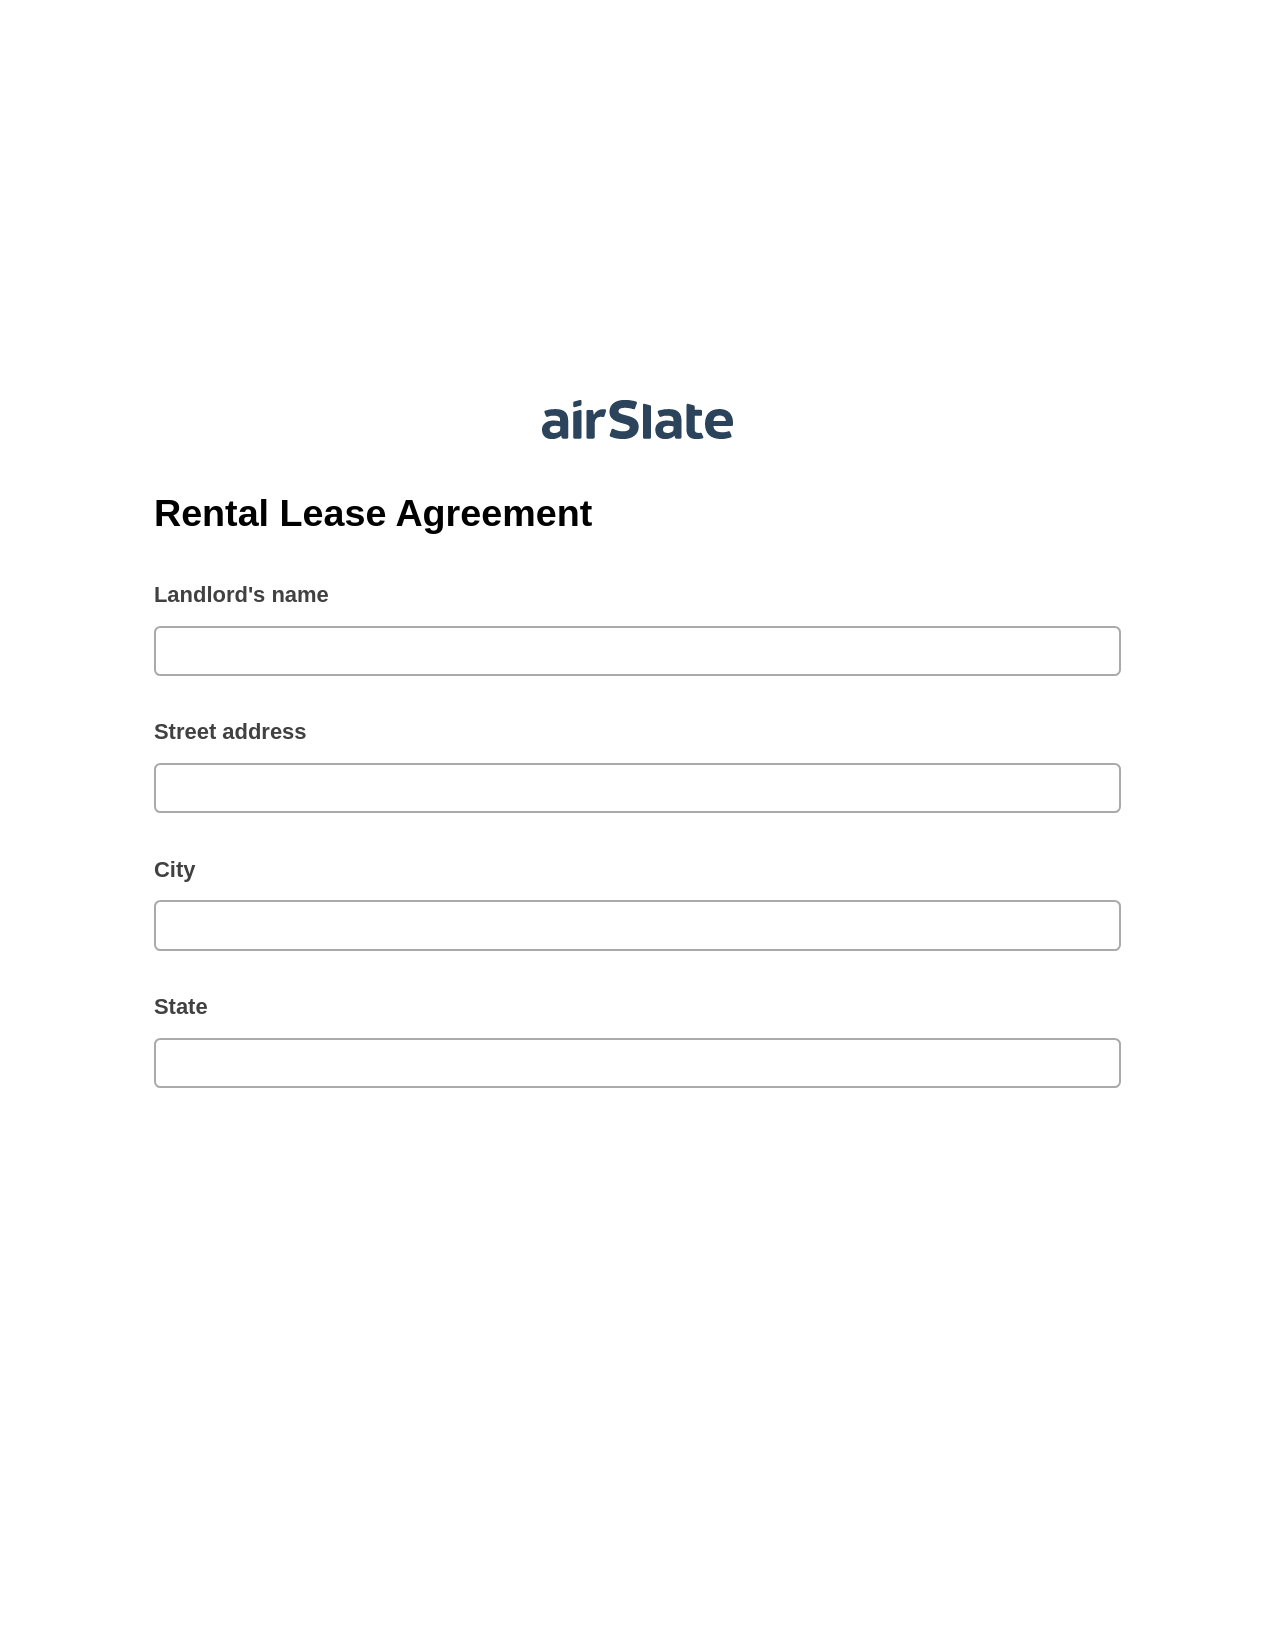 Rental Lease Agreement Pre-fill Dropdowns from Office 365 Excel Bot, Invoke Salesforce Process Bot, Export to Smartsheet